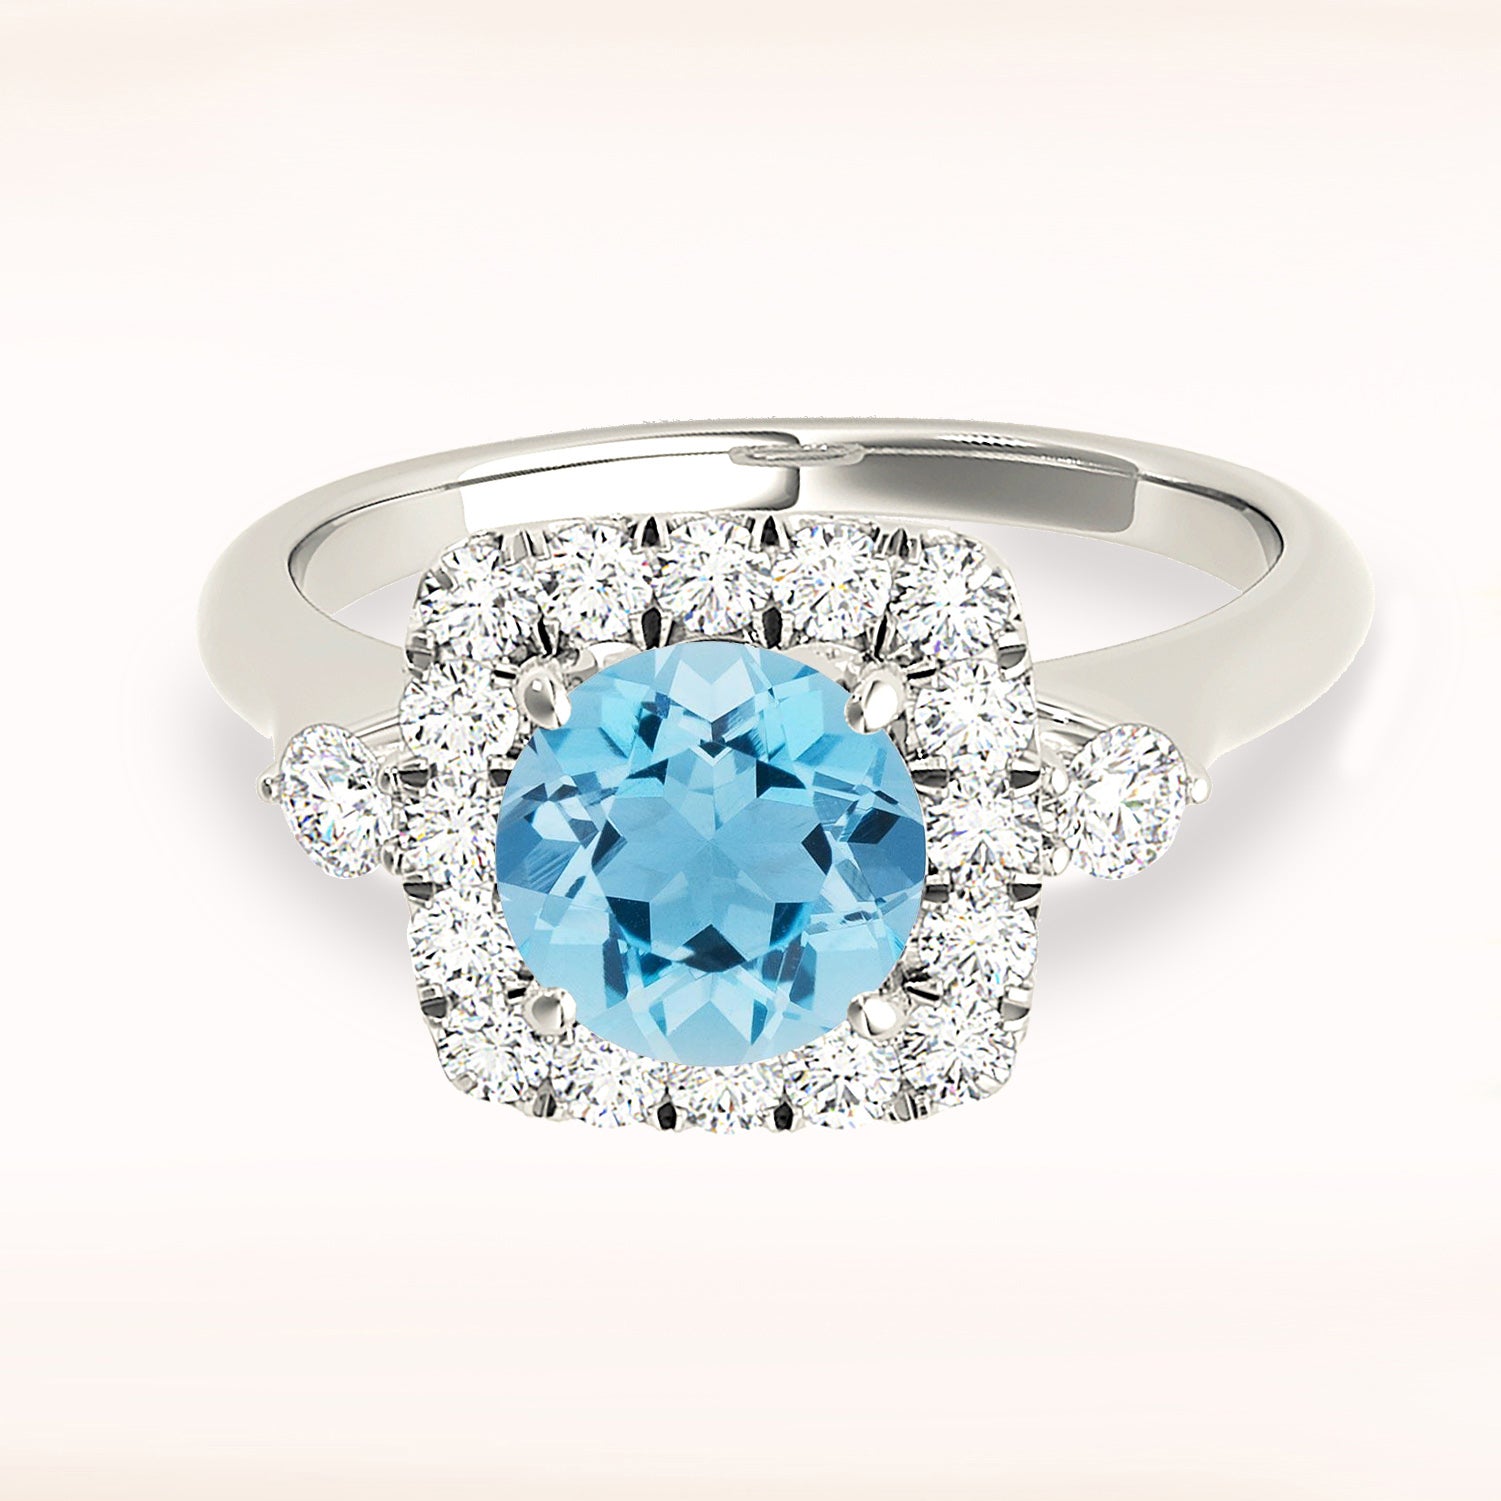 2.00 ct.Genuine Aquamarine Ring With 0.50 ctw. Diamond Cushion Halo And Side Accent Diamonds,Solid Gold Band | Round Blue Aquamarine Halo Ring-in 14K/18K White, Yellow, Rose Gold and Platinum - Christmas Jewelry Gift -VIRABYANI